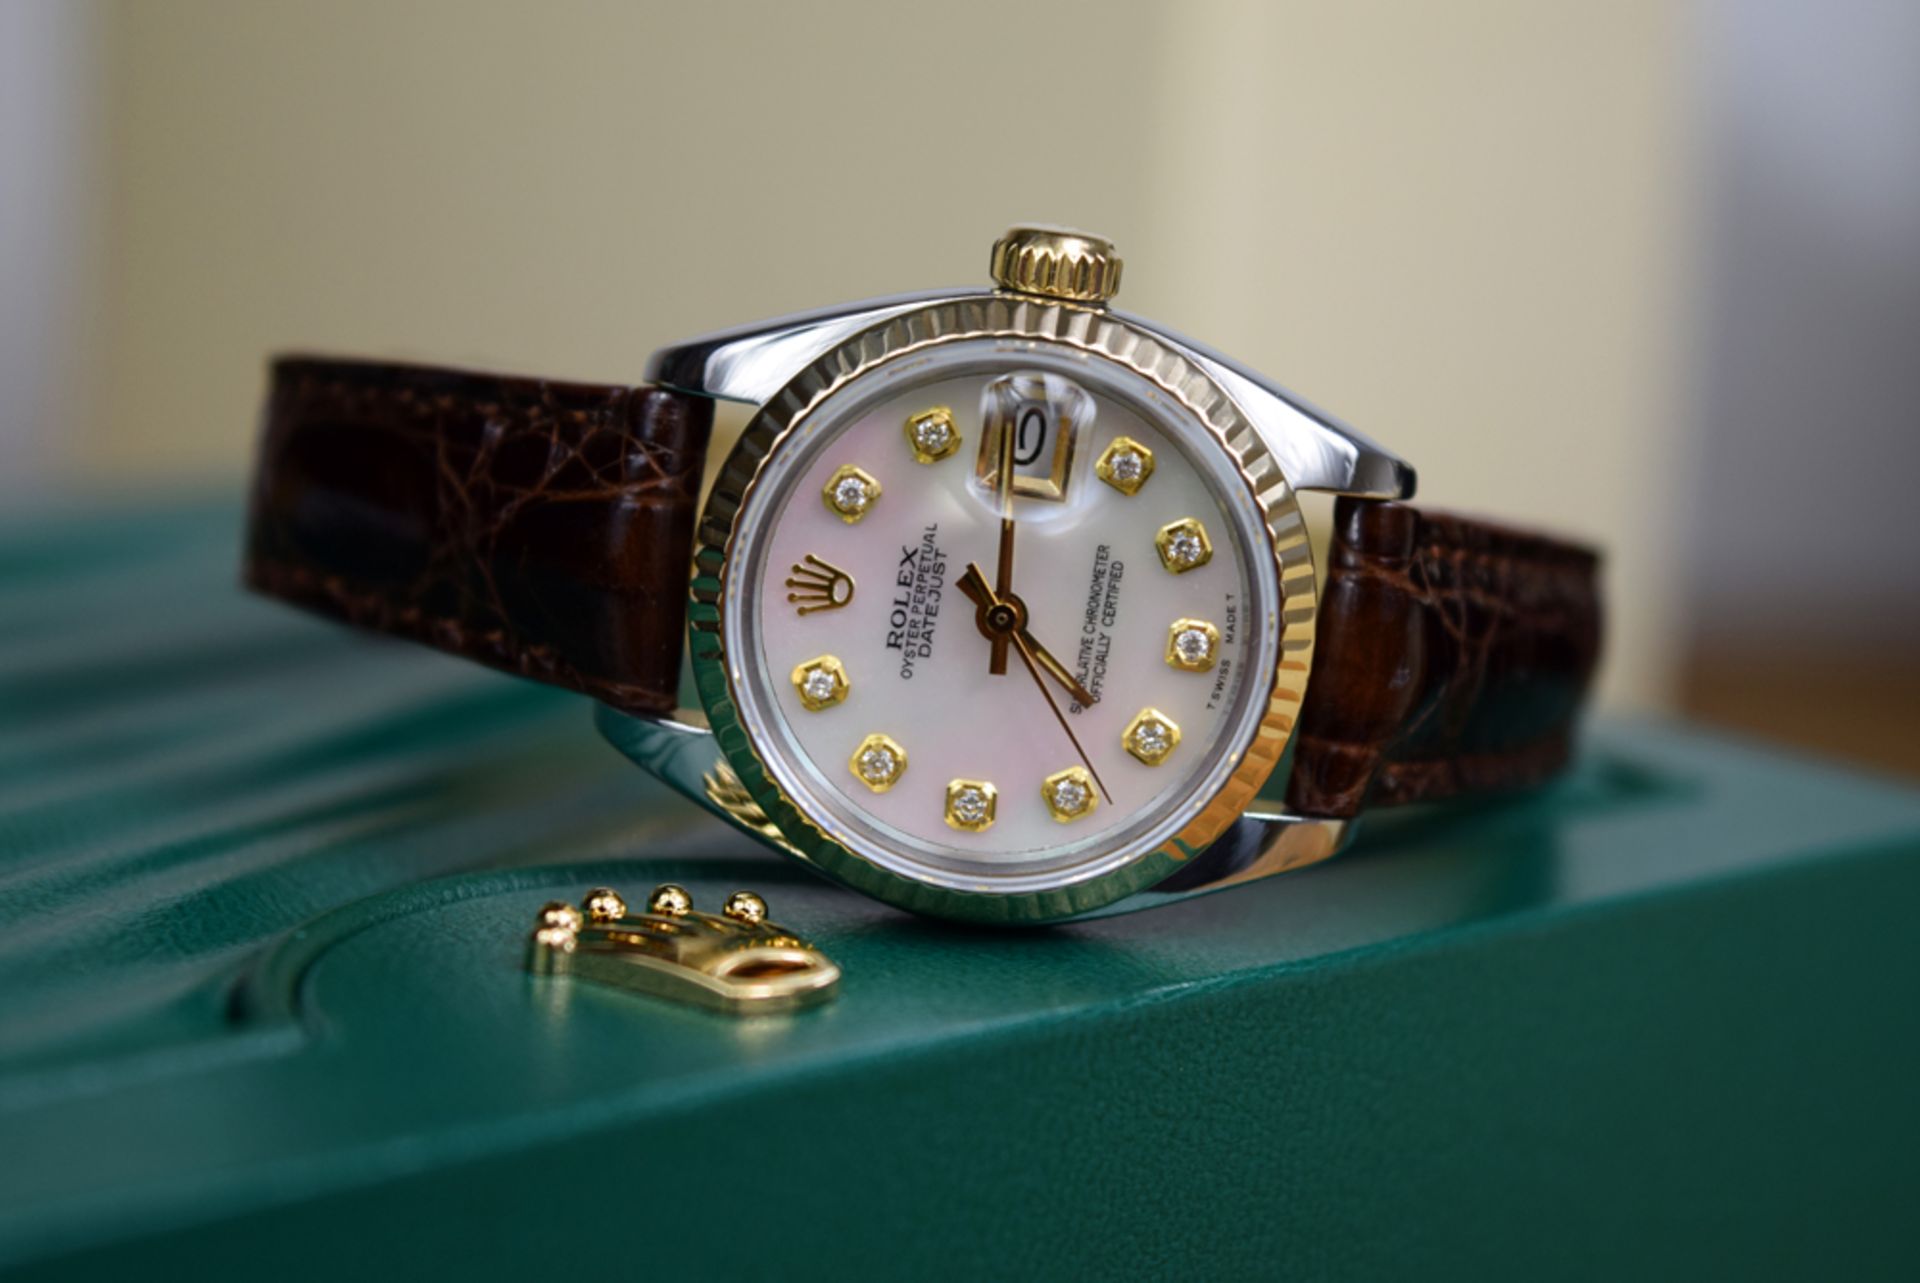 ROLEX - 18K GOLD & STEEL LADY DATEJUST - MOP *DIAMOND* DIAL! - Image 9 of 9